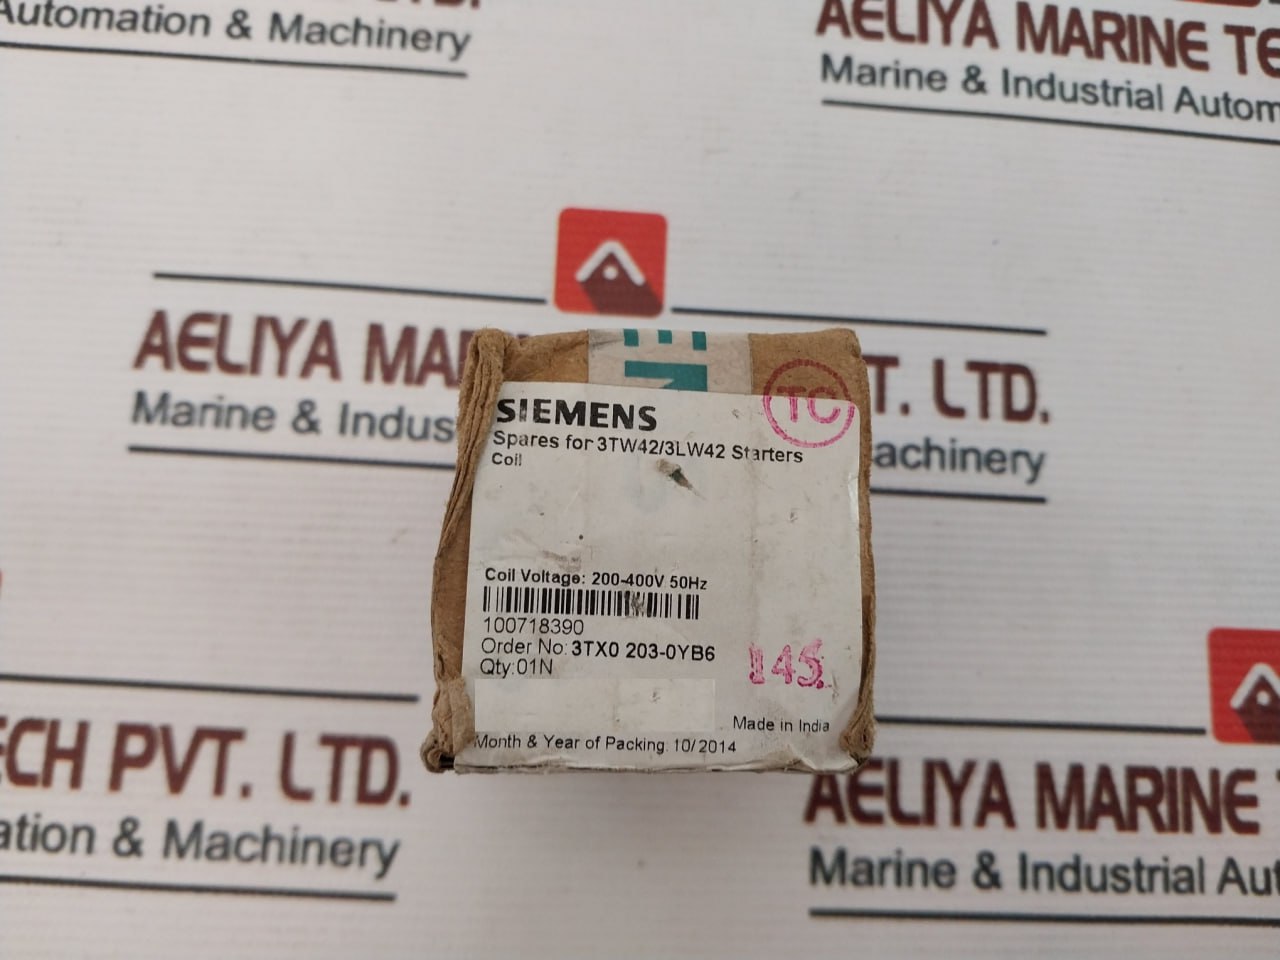 Siemens 3Tx0 203-0Yb6 Wide Band Coil Spares For 3Tw42/3Lw42 Starters Coil